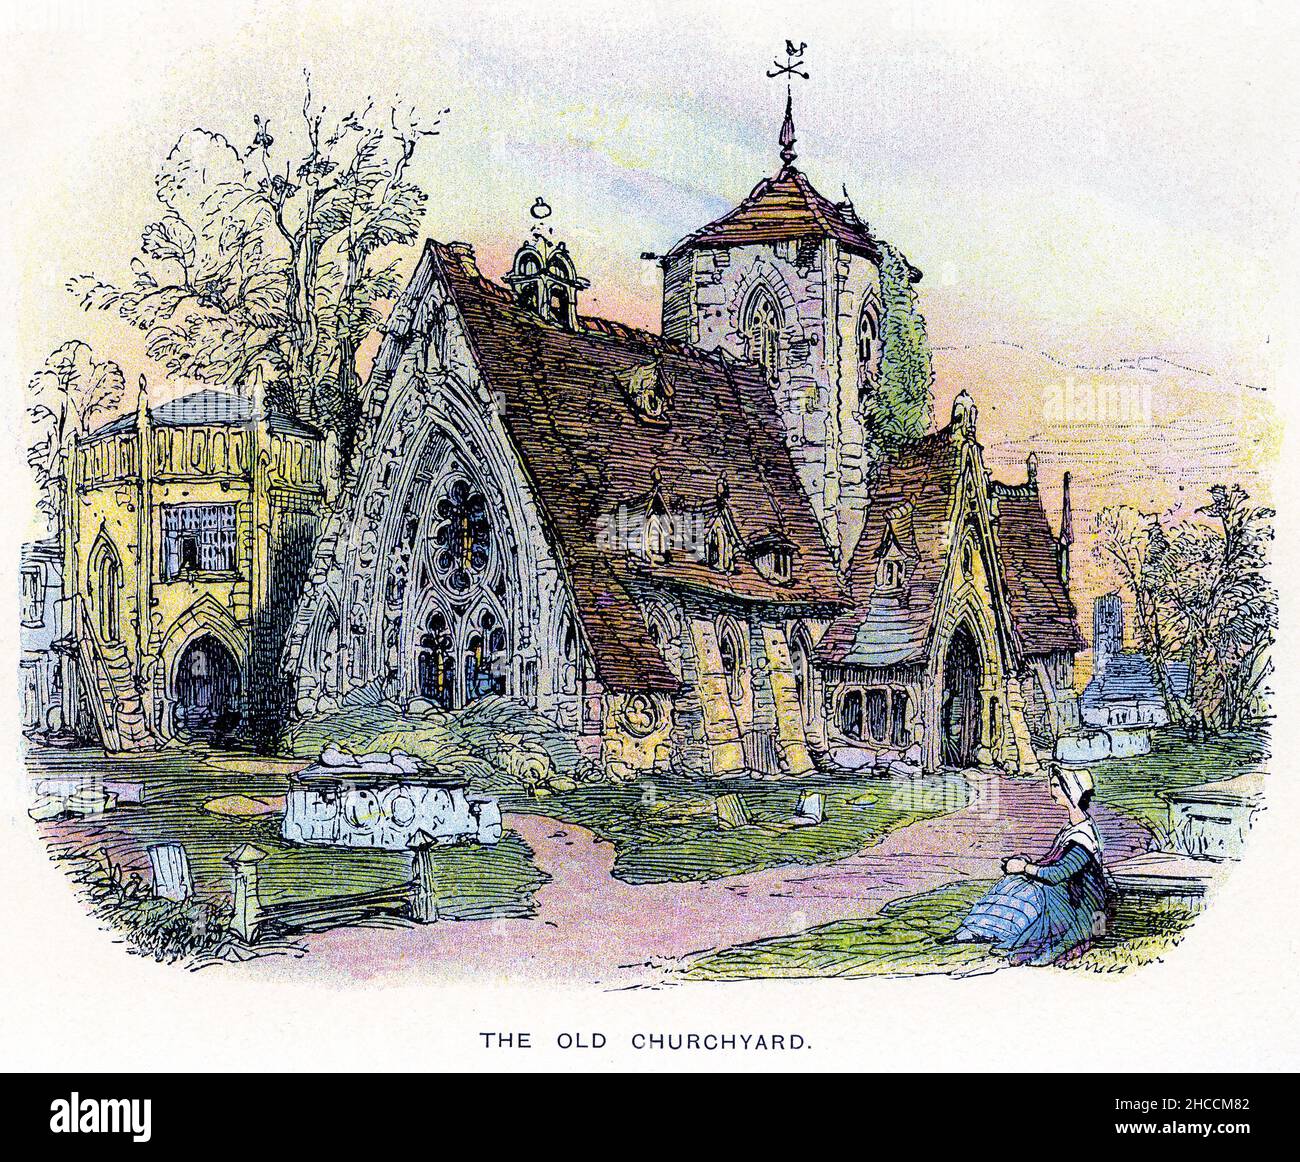 Engraving of the old churchyard, a scene from a Victorian era book by Charles Dickens, published circa 1908 Stock Photo